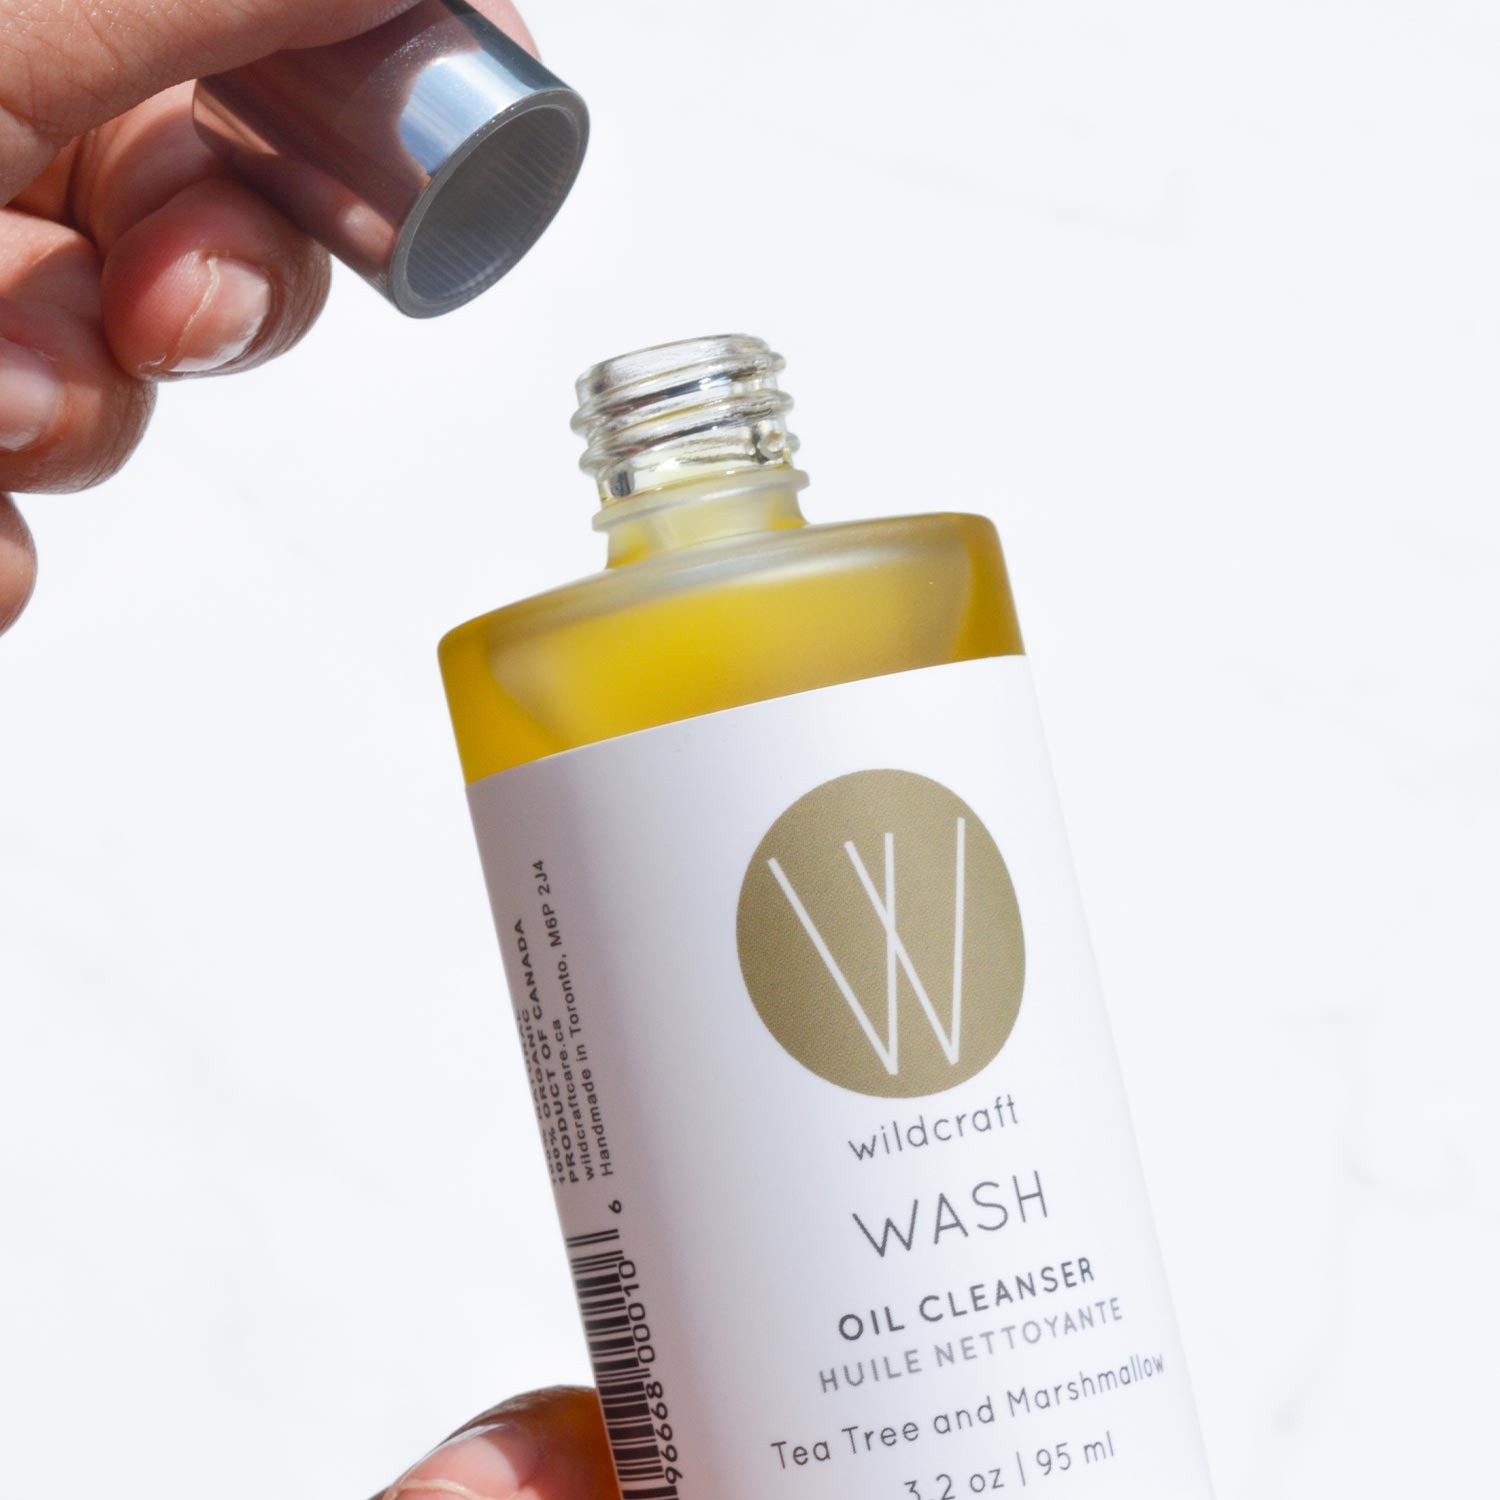 Low Waste Wash Oil Cleanser